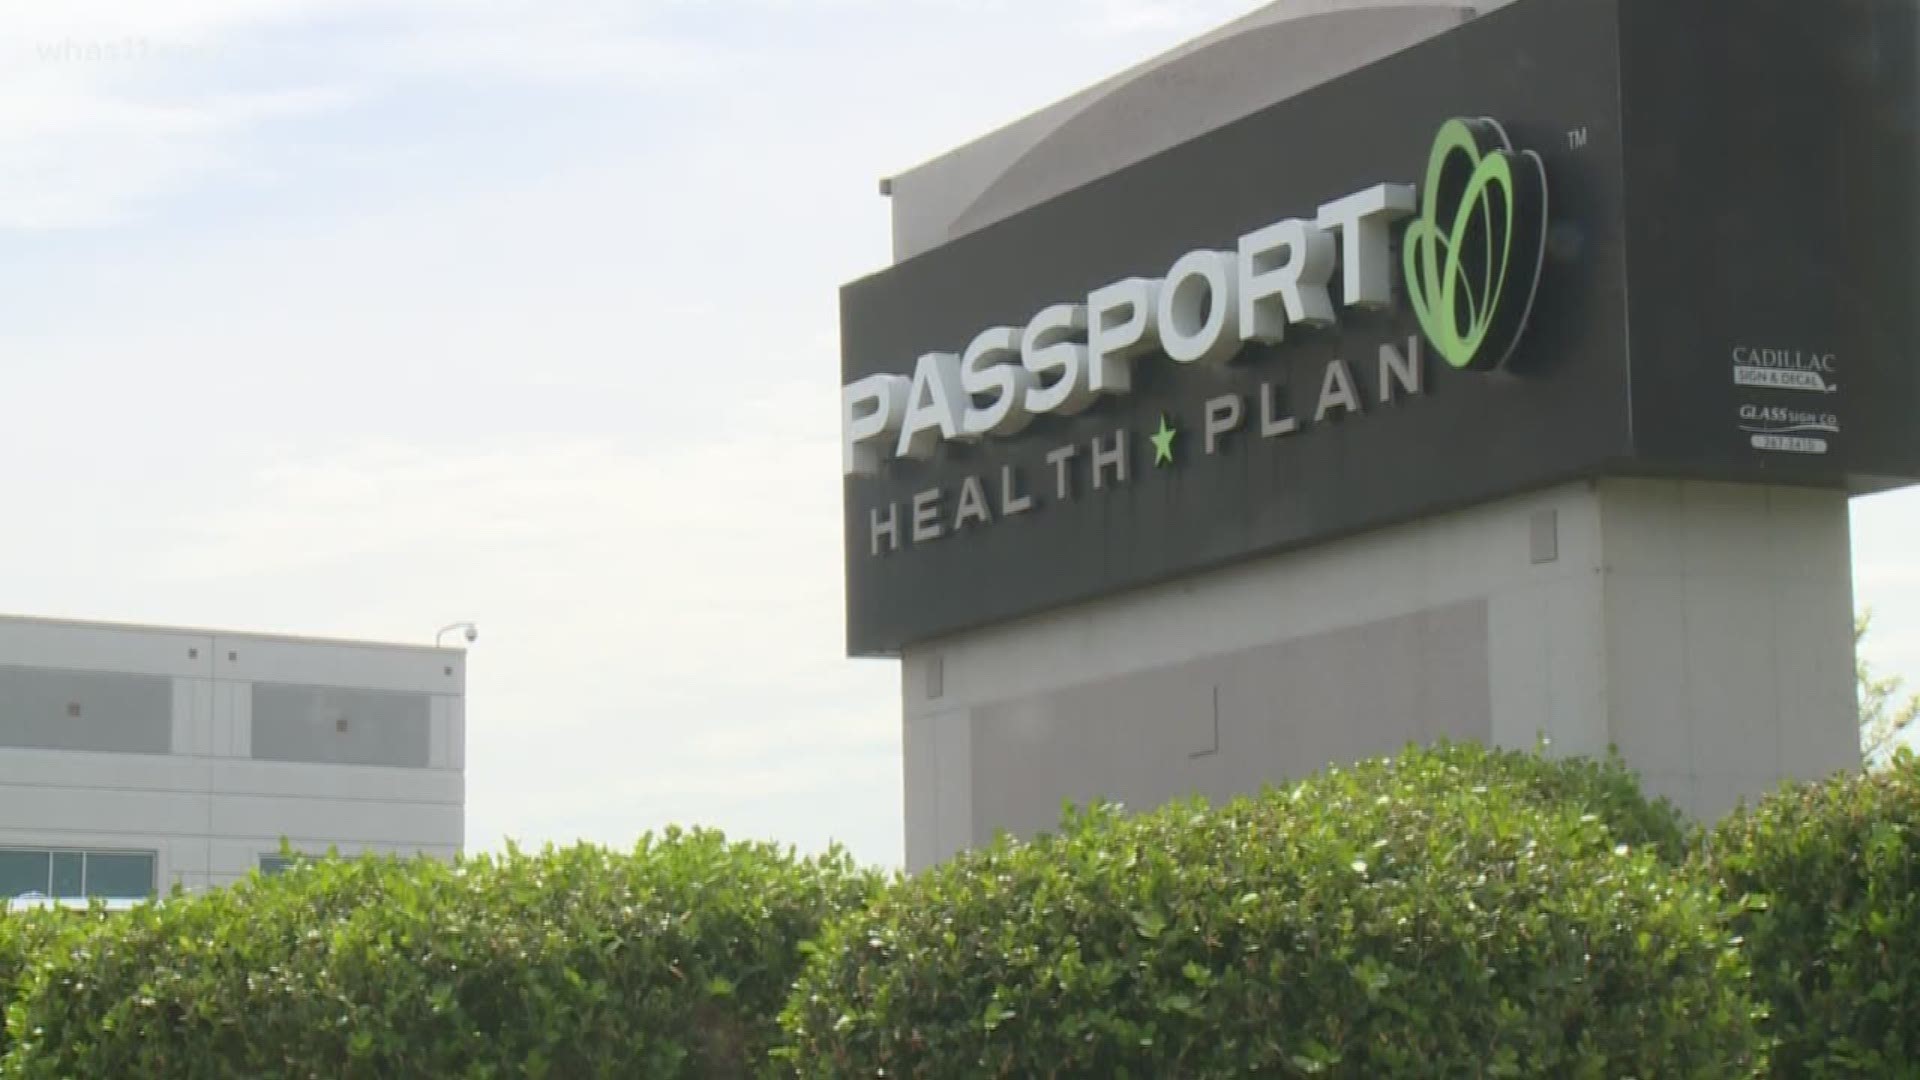 Louisville based insurer Passport Health Plan has waged a legal battle against Governor Bevin claiming the state's cuts to Medicaid reimbursement rates will put them out of business by March.